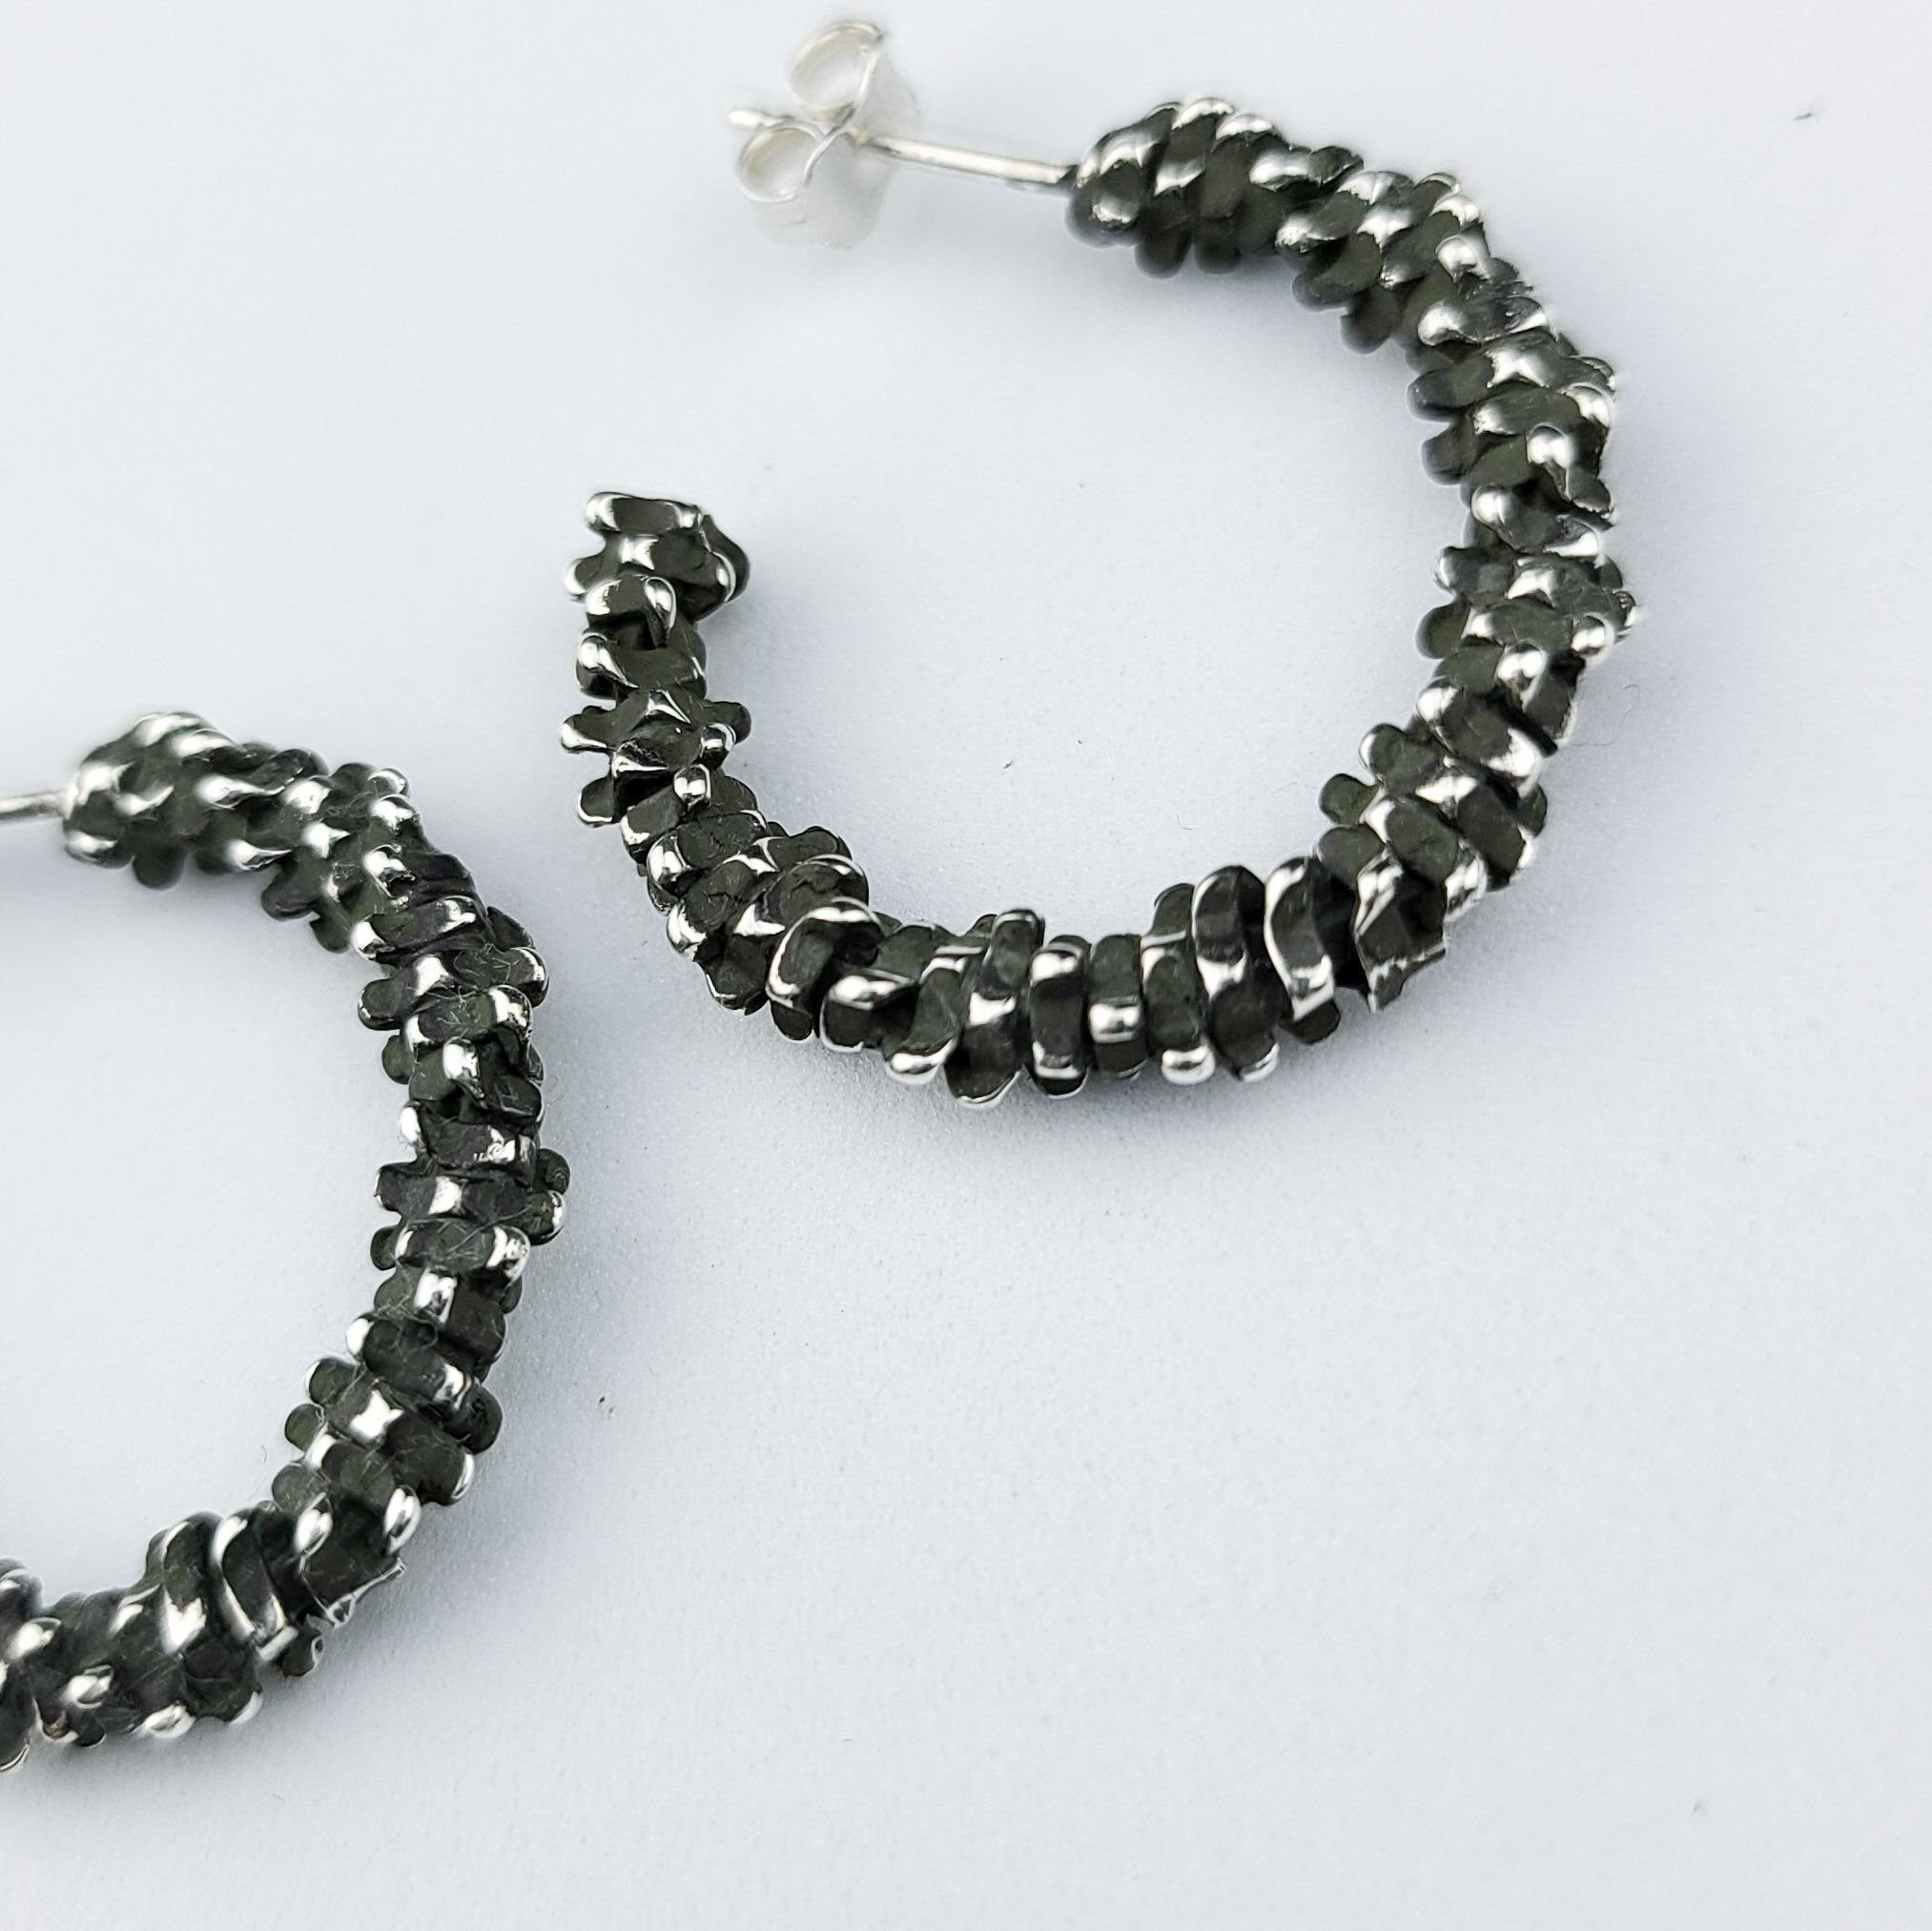 Small Textured Hoops in Sterling Silver